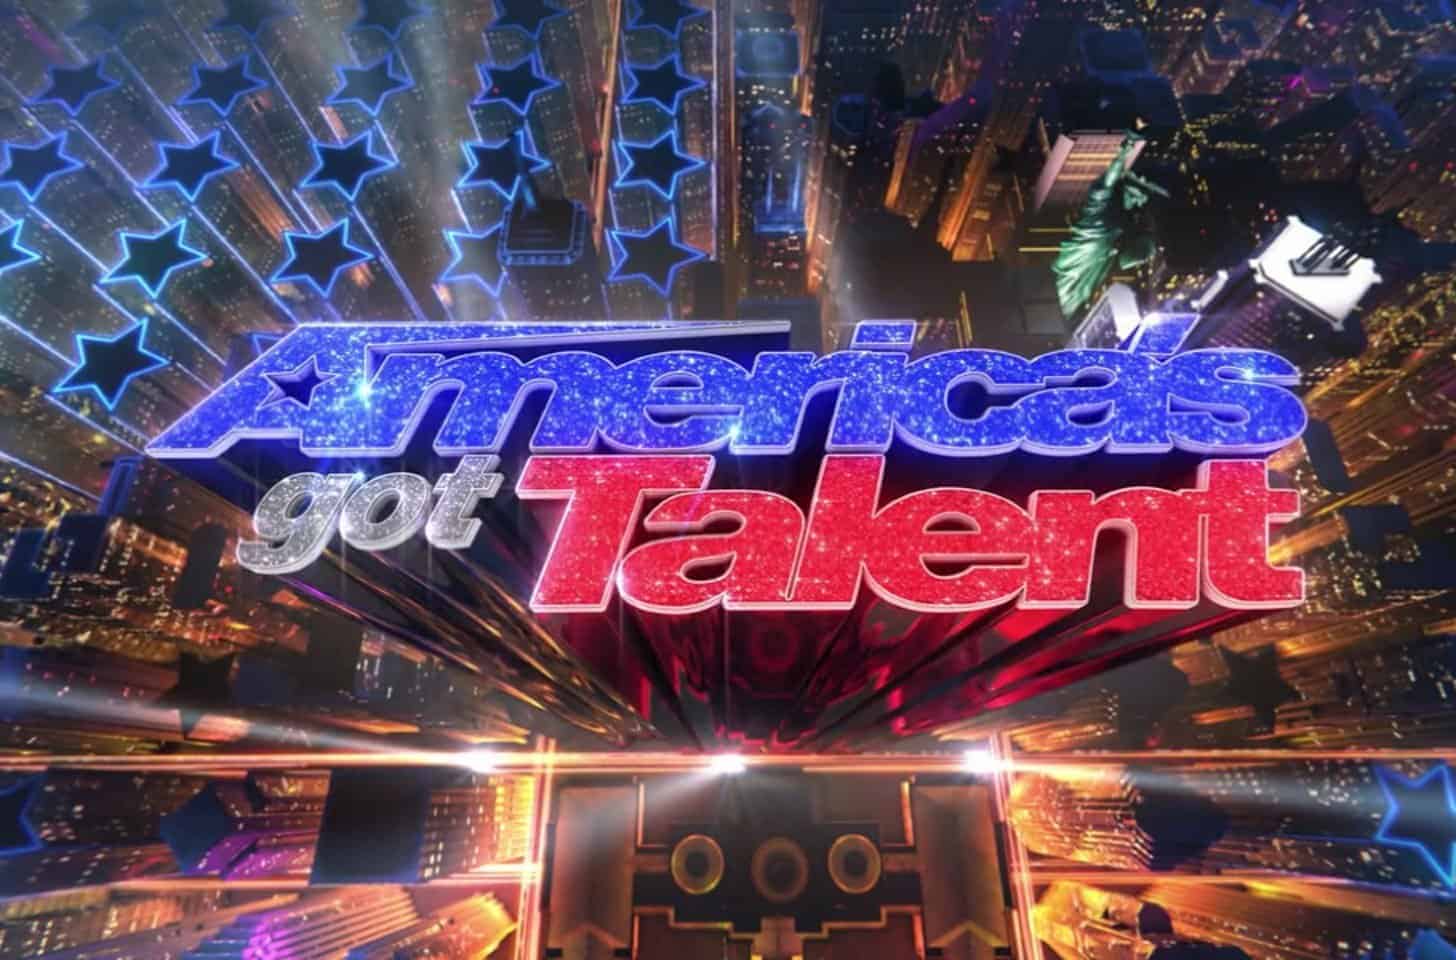 Everything You Need to Know About “America’s Got Talent”